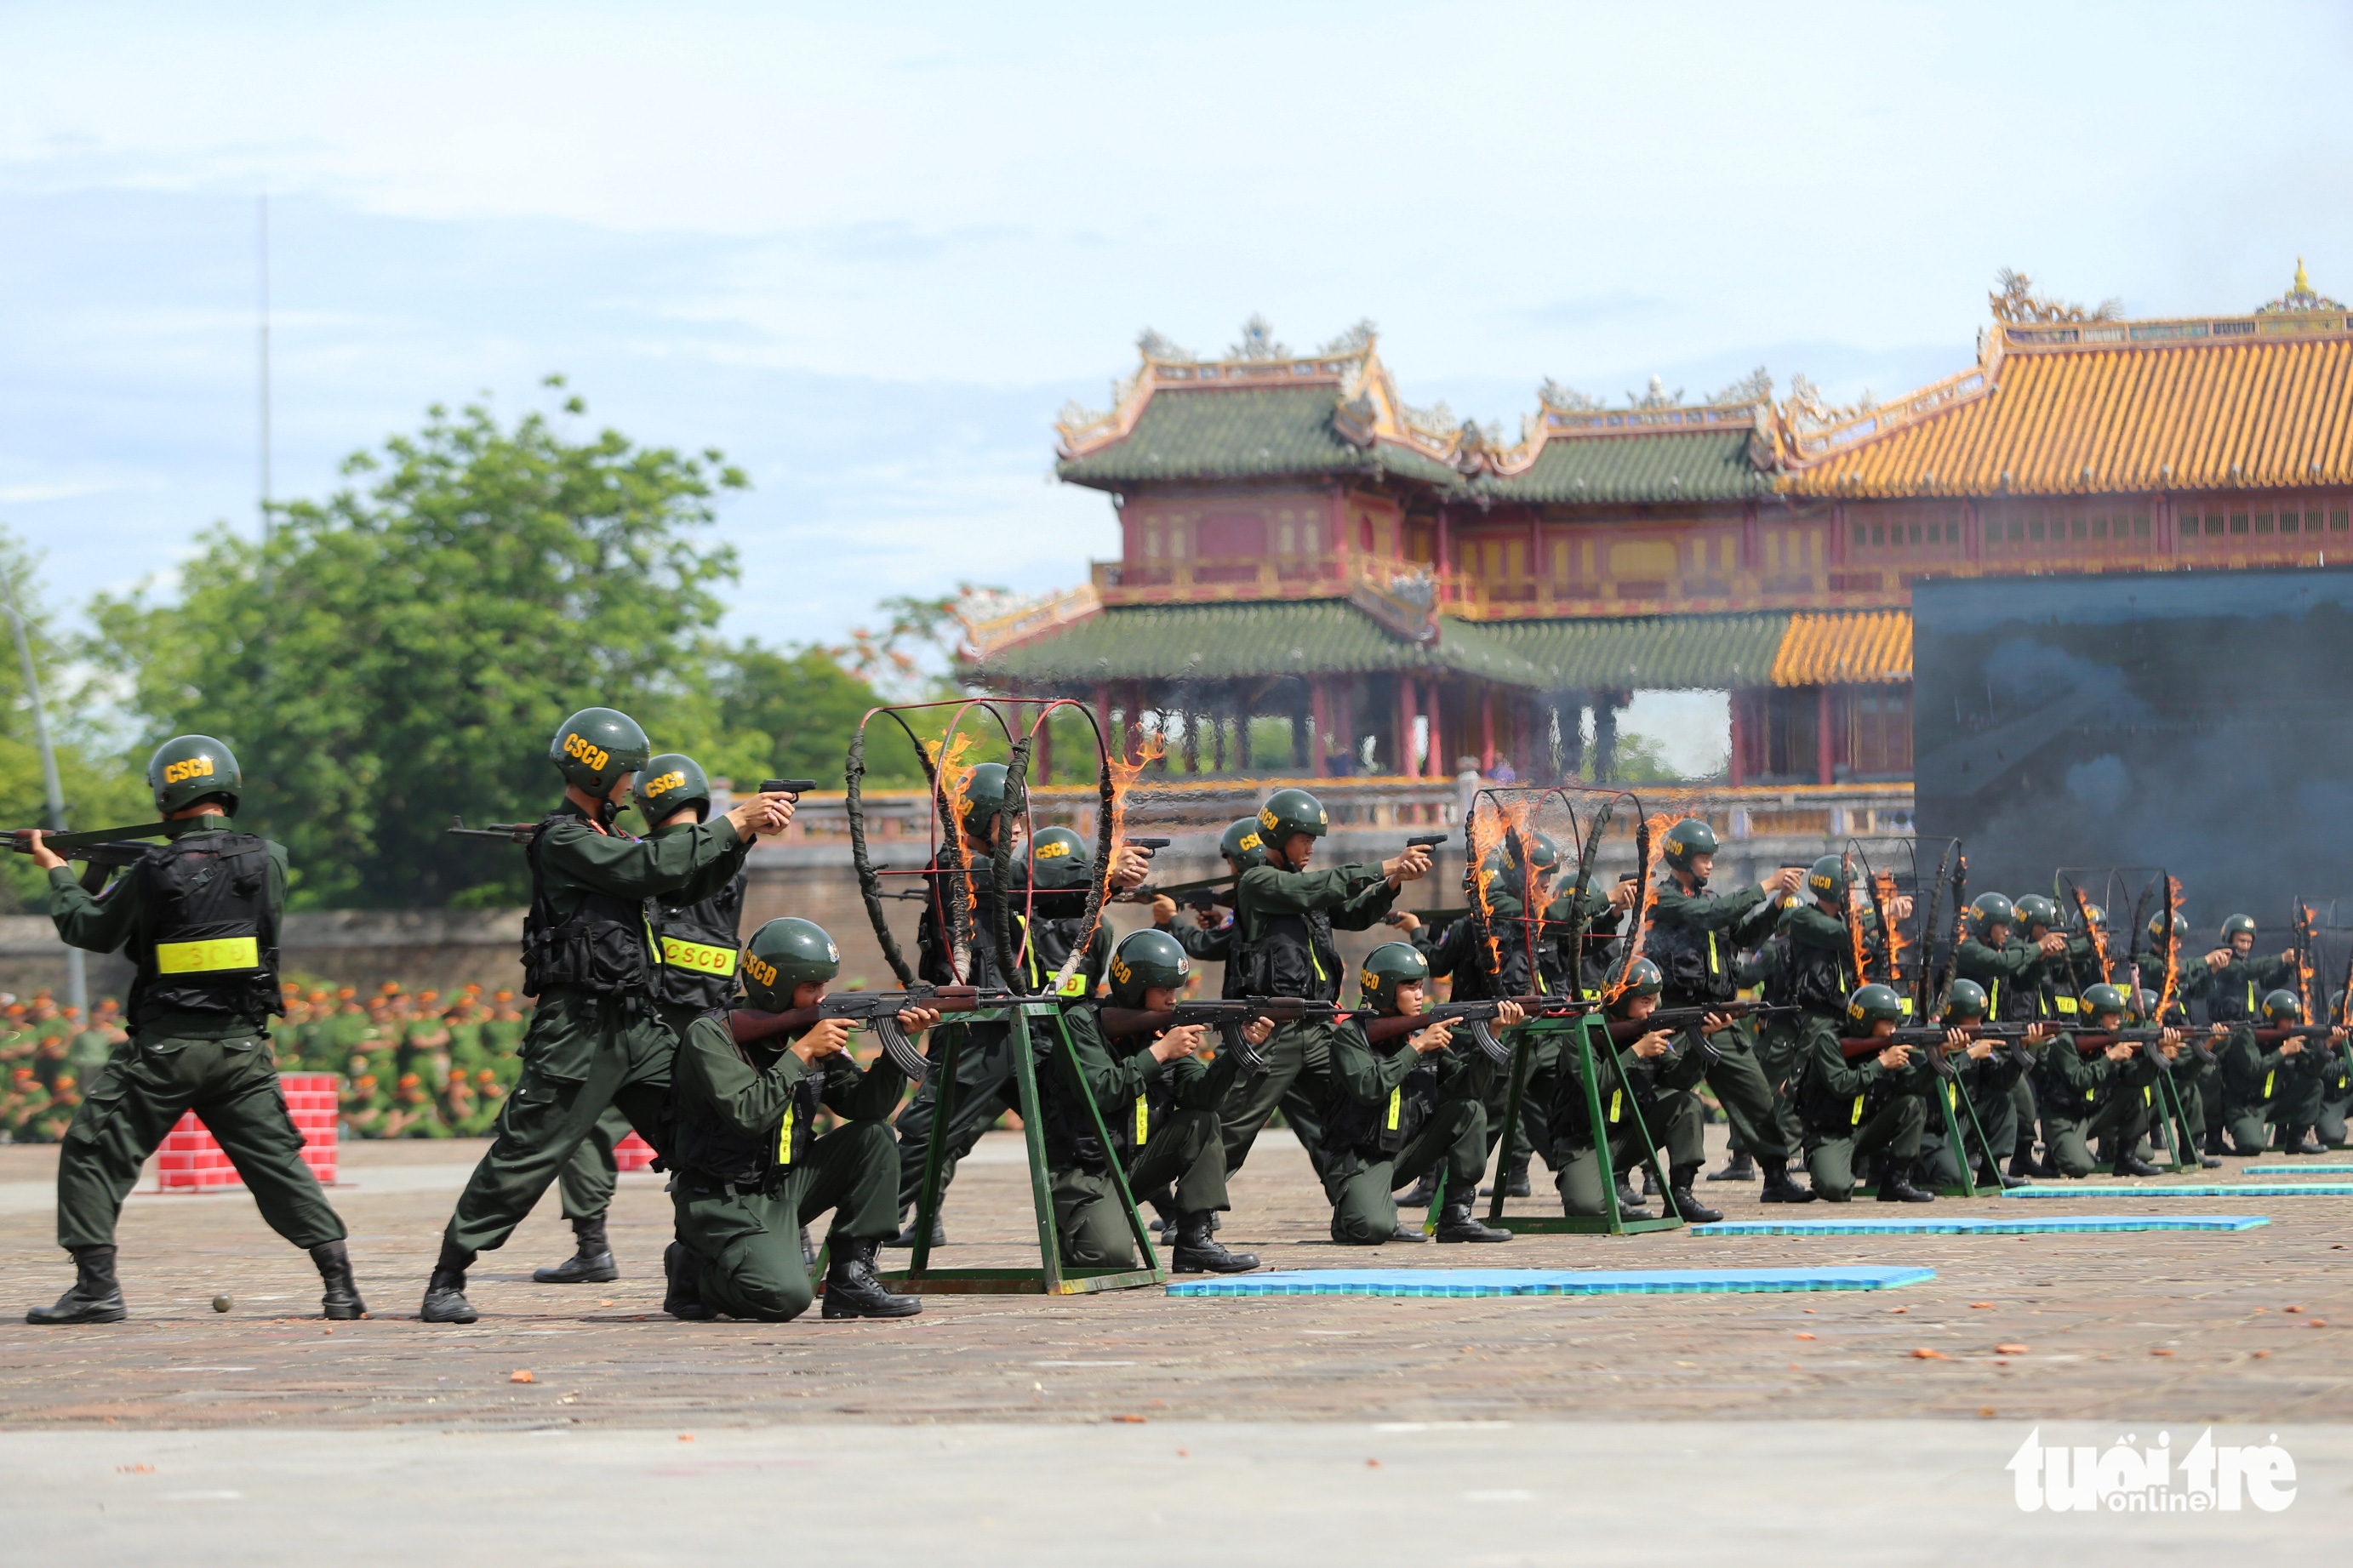 A shooting performance during the opening ceremony of the competition’s final round in Thua Thien-Hue Province, Vietnam, July 4, 2022. Photo: N.Anh / Tuoi Tre